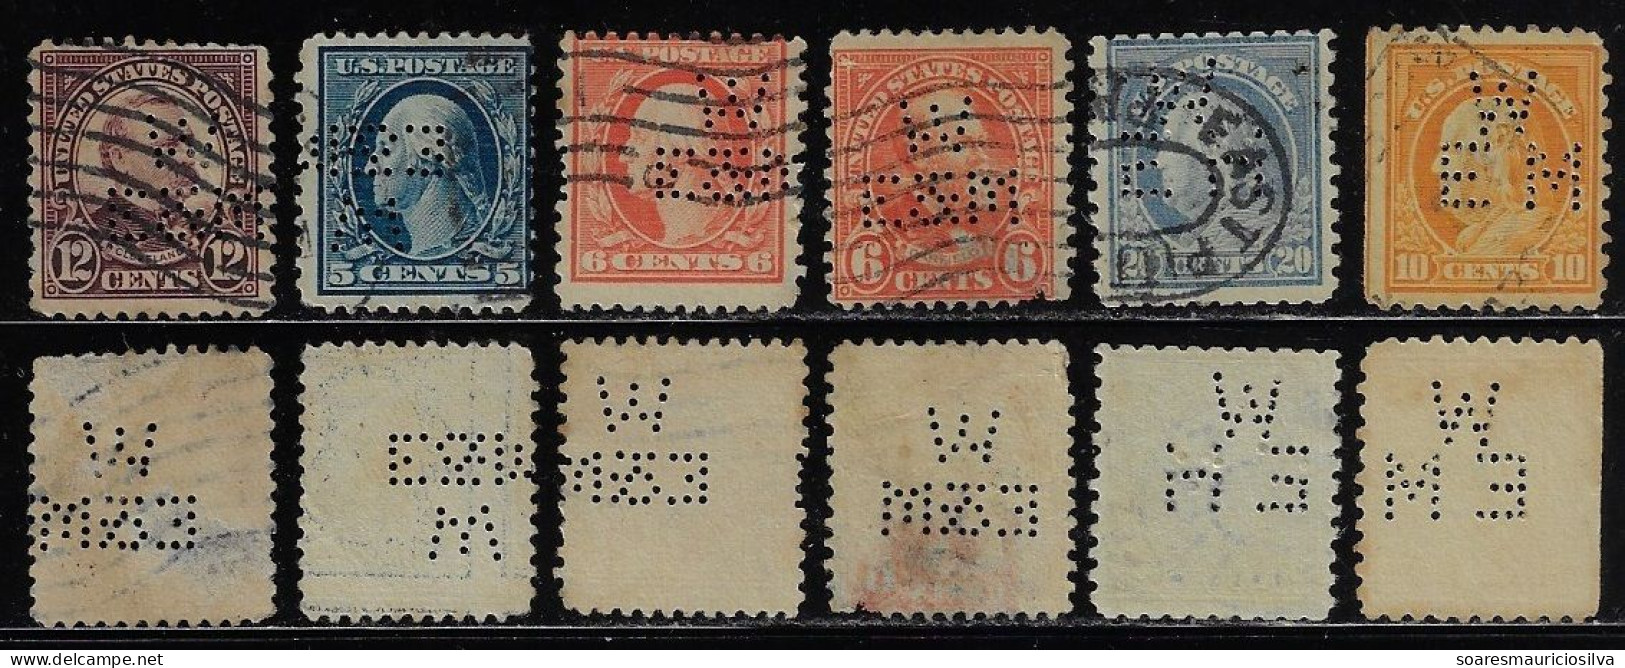 USA 1902/1954 6 Stamp Perfin W/E&M W/EM Westinghouse Electric & Manufacturing Company East Pittsburgh Lochung Perfore - Perfins